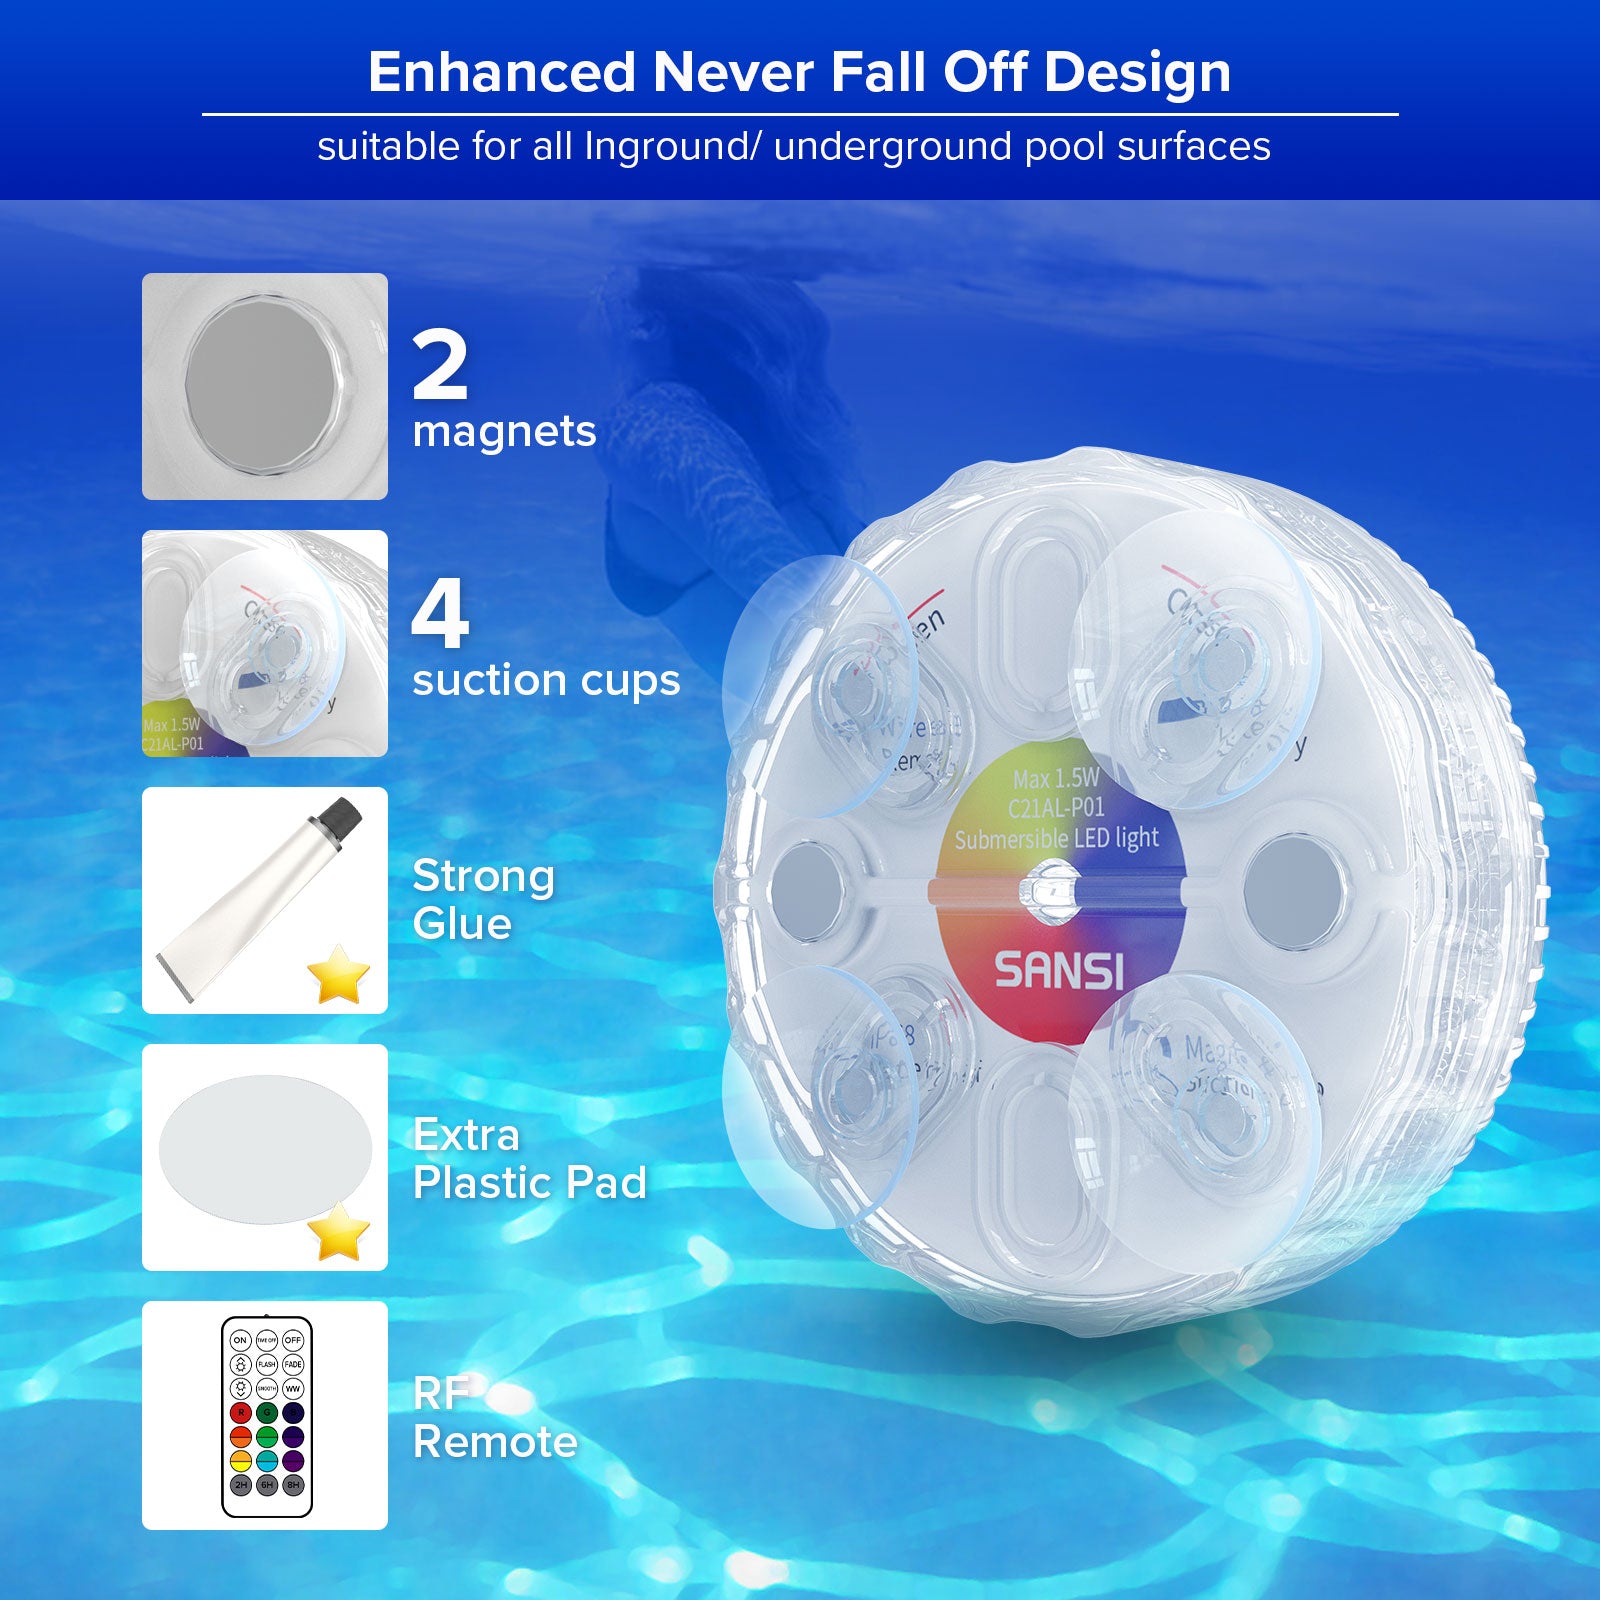 Upgraded RGB LED Submersible Pool Light (US ONLY) has enhanced never fall off design，suitable for all Inground/ underground pool surfaces.